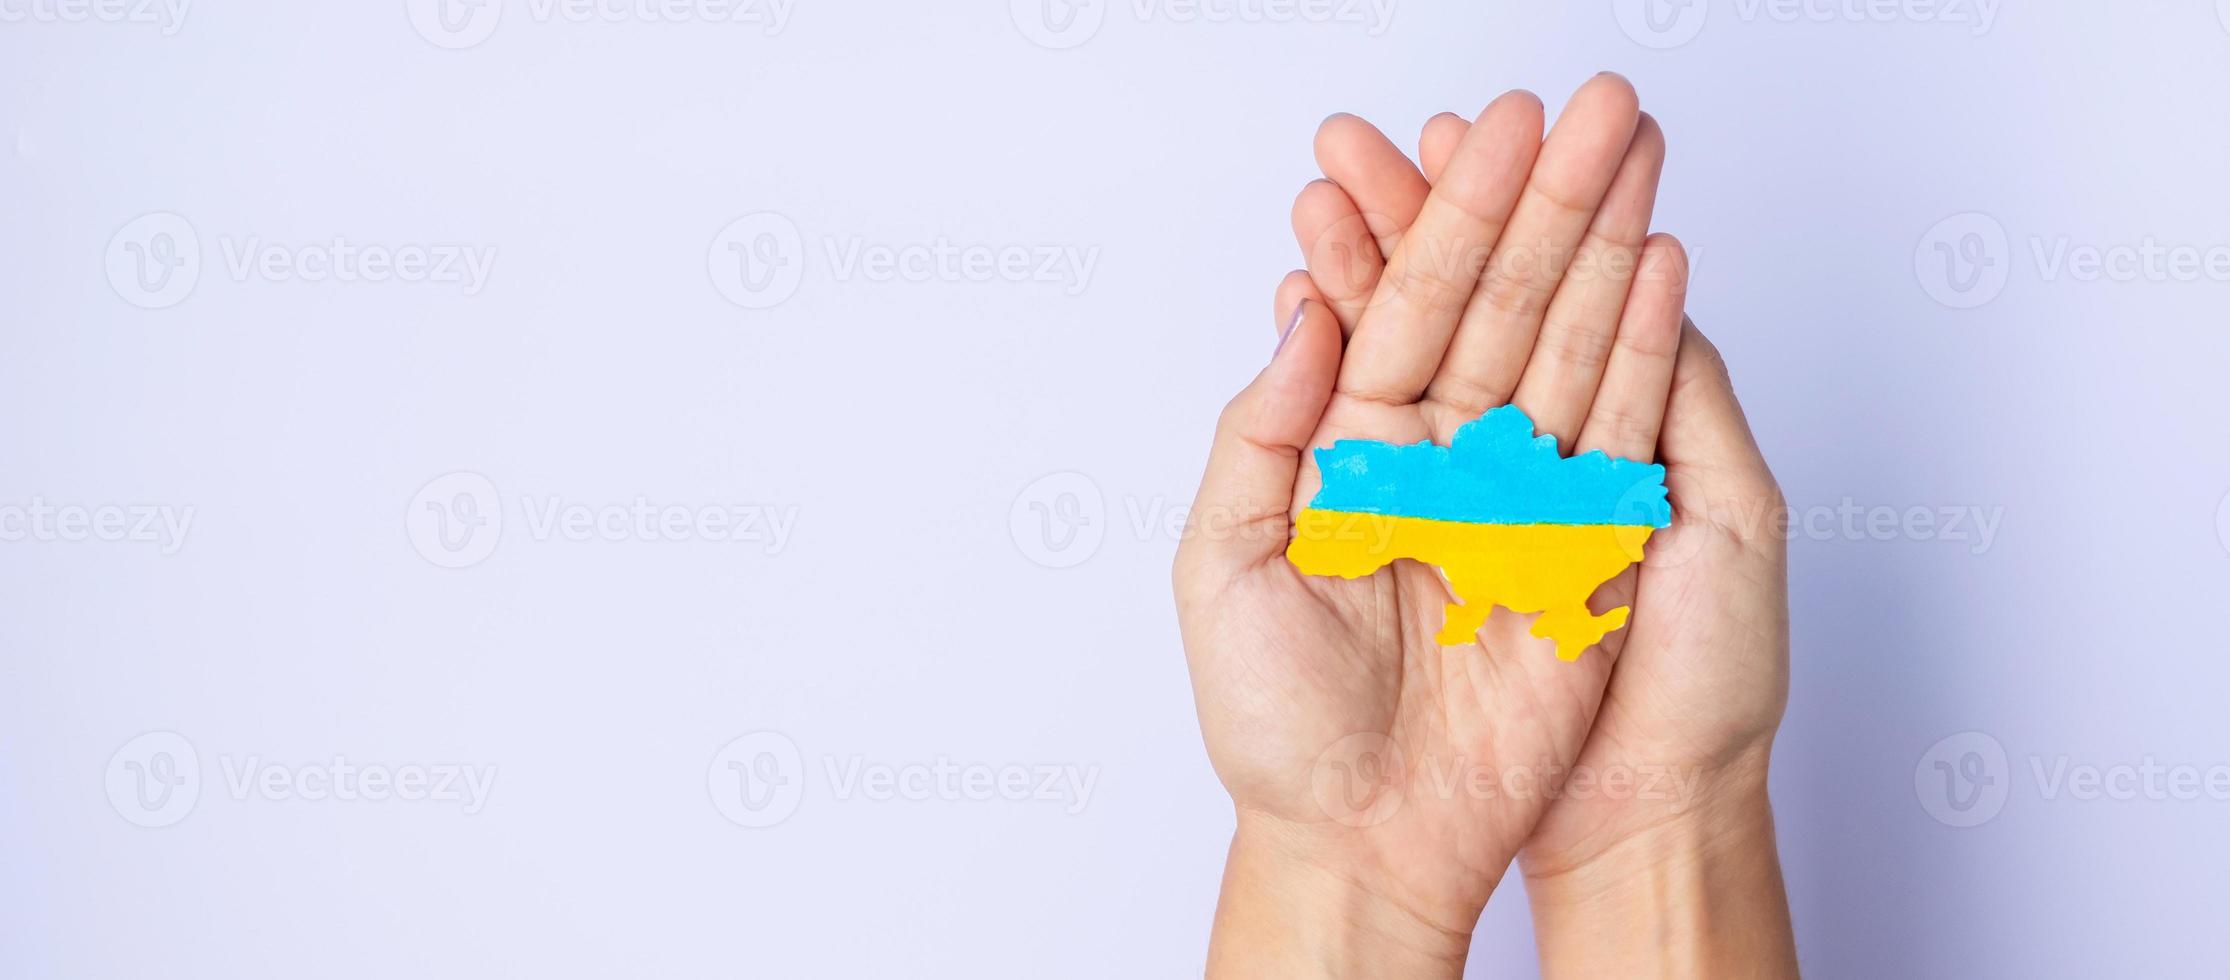 Support for Ukraine in the war with Russia, Hands holding the shape of Ukraine border with color flag. Pray, No war, stop war and stand with Ukraine photo